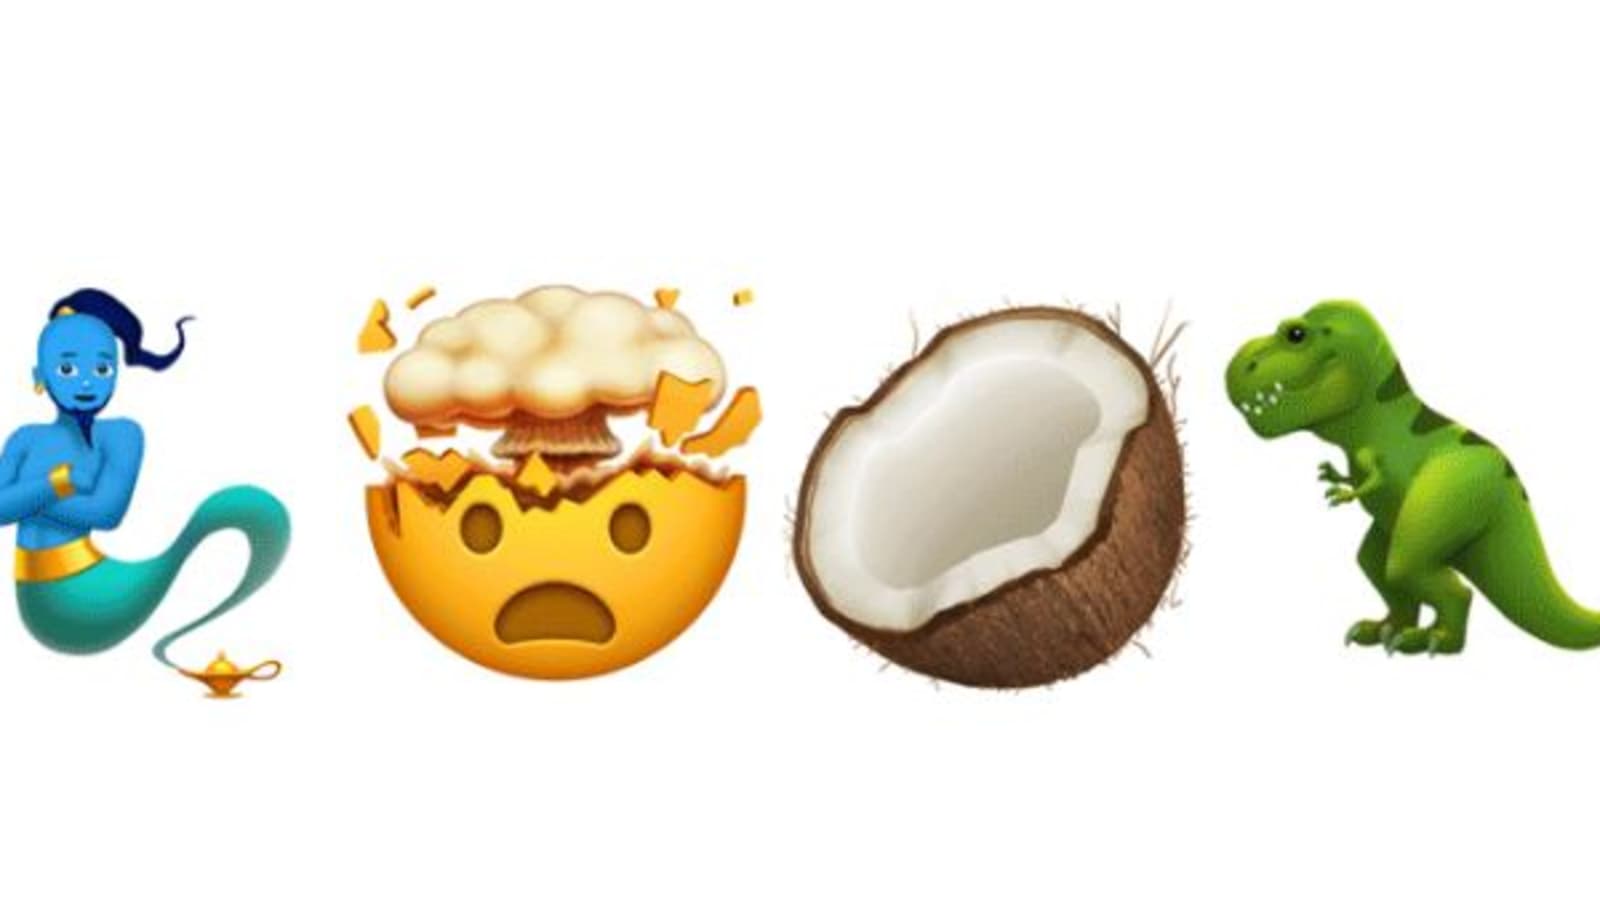 Apple previews new emojis coming to iPhone and iPad